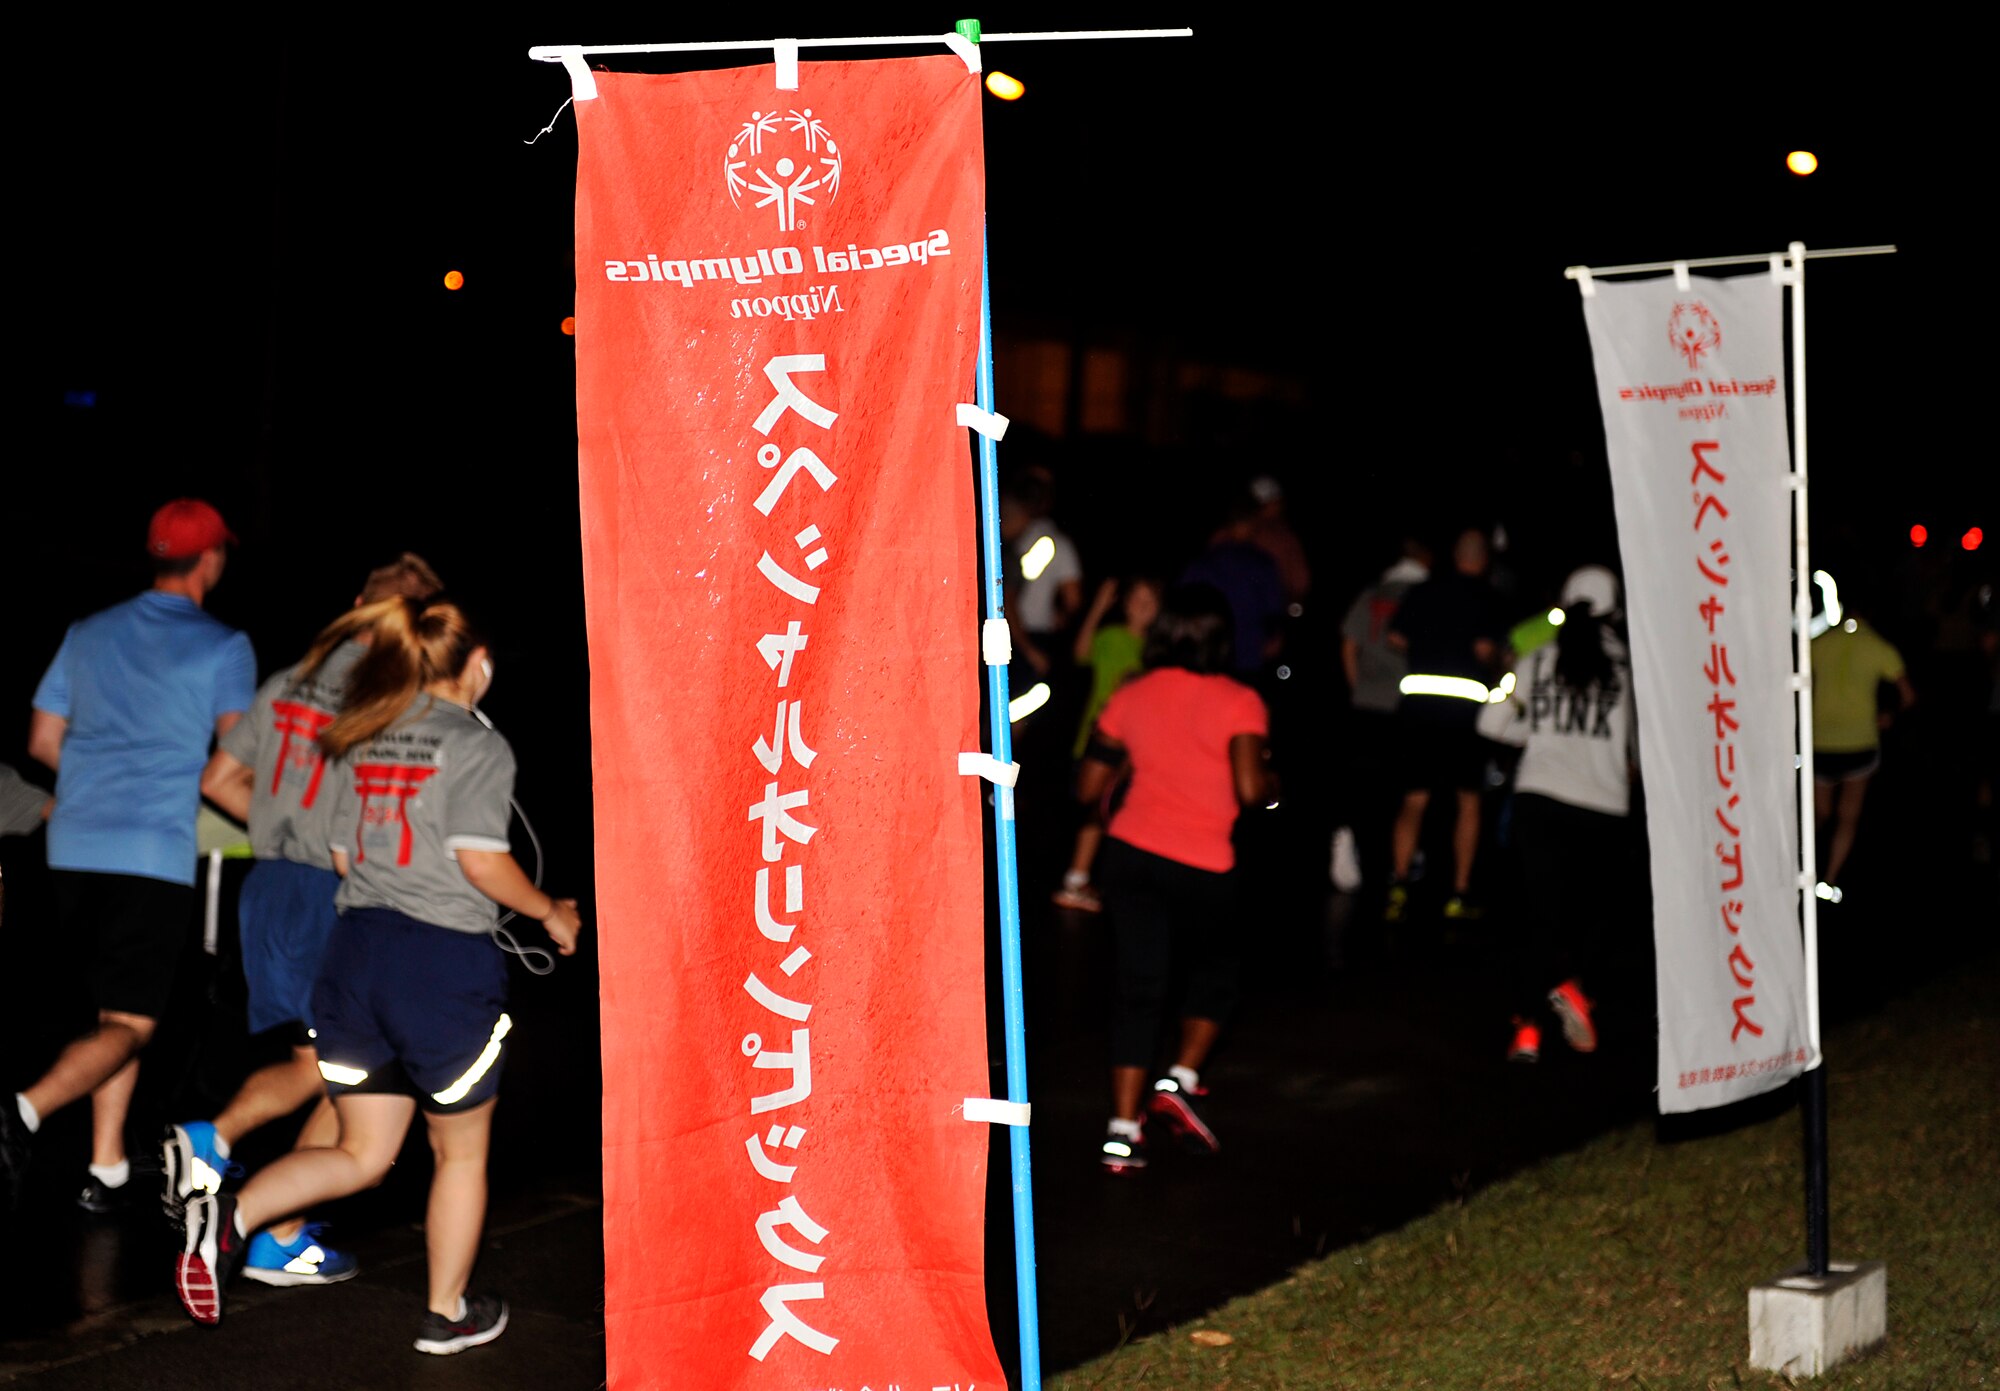 The 353rd Special Operations Group conducts a 5k fun run to support of the Kadena Special Olympics on Kadena Air Base, Japan, Oct. 31, 2014. The 5k fun run is an annual event intended to raise awareness of the Kadena Special Olympics. This year marks the 15th annual KSO, scheduled for Nov. 8. (U.S. Air Force photo by Naoto Anazawa)